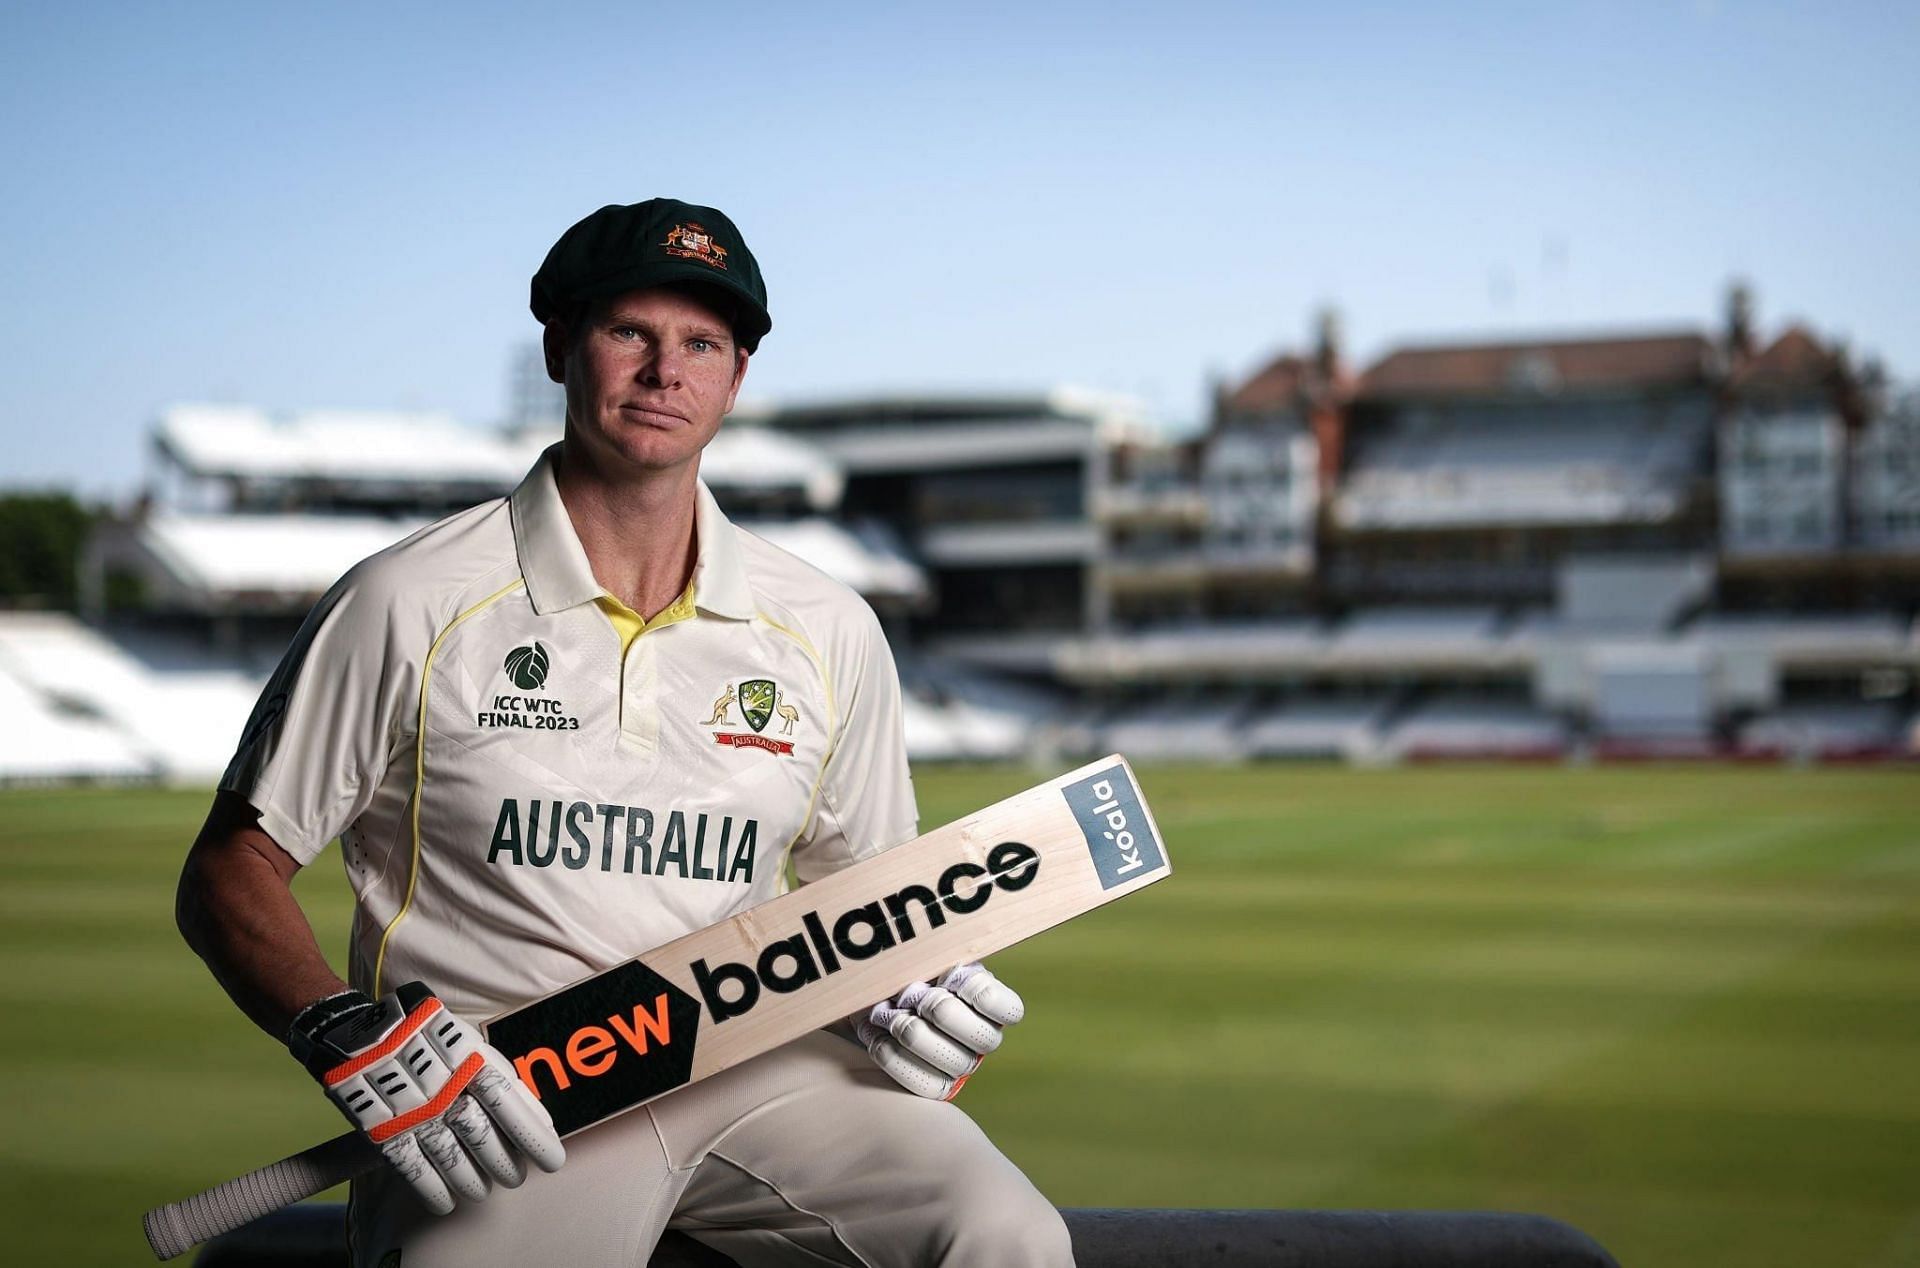 Steve Smith scored an important century in the 2023 WTC final (Image via ICC)